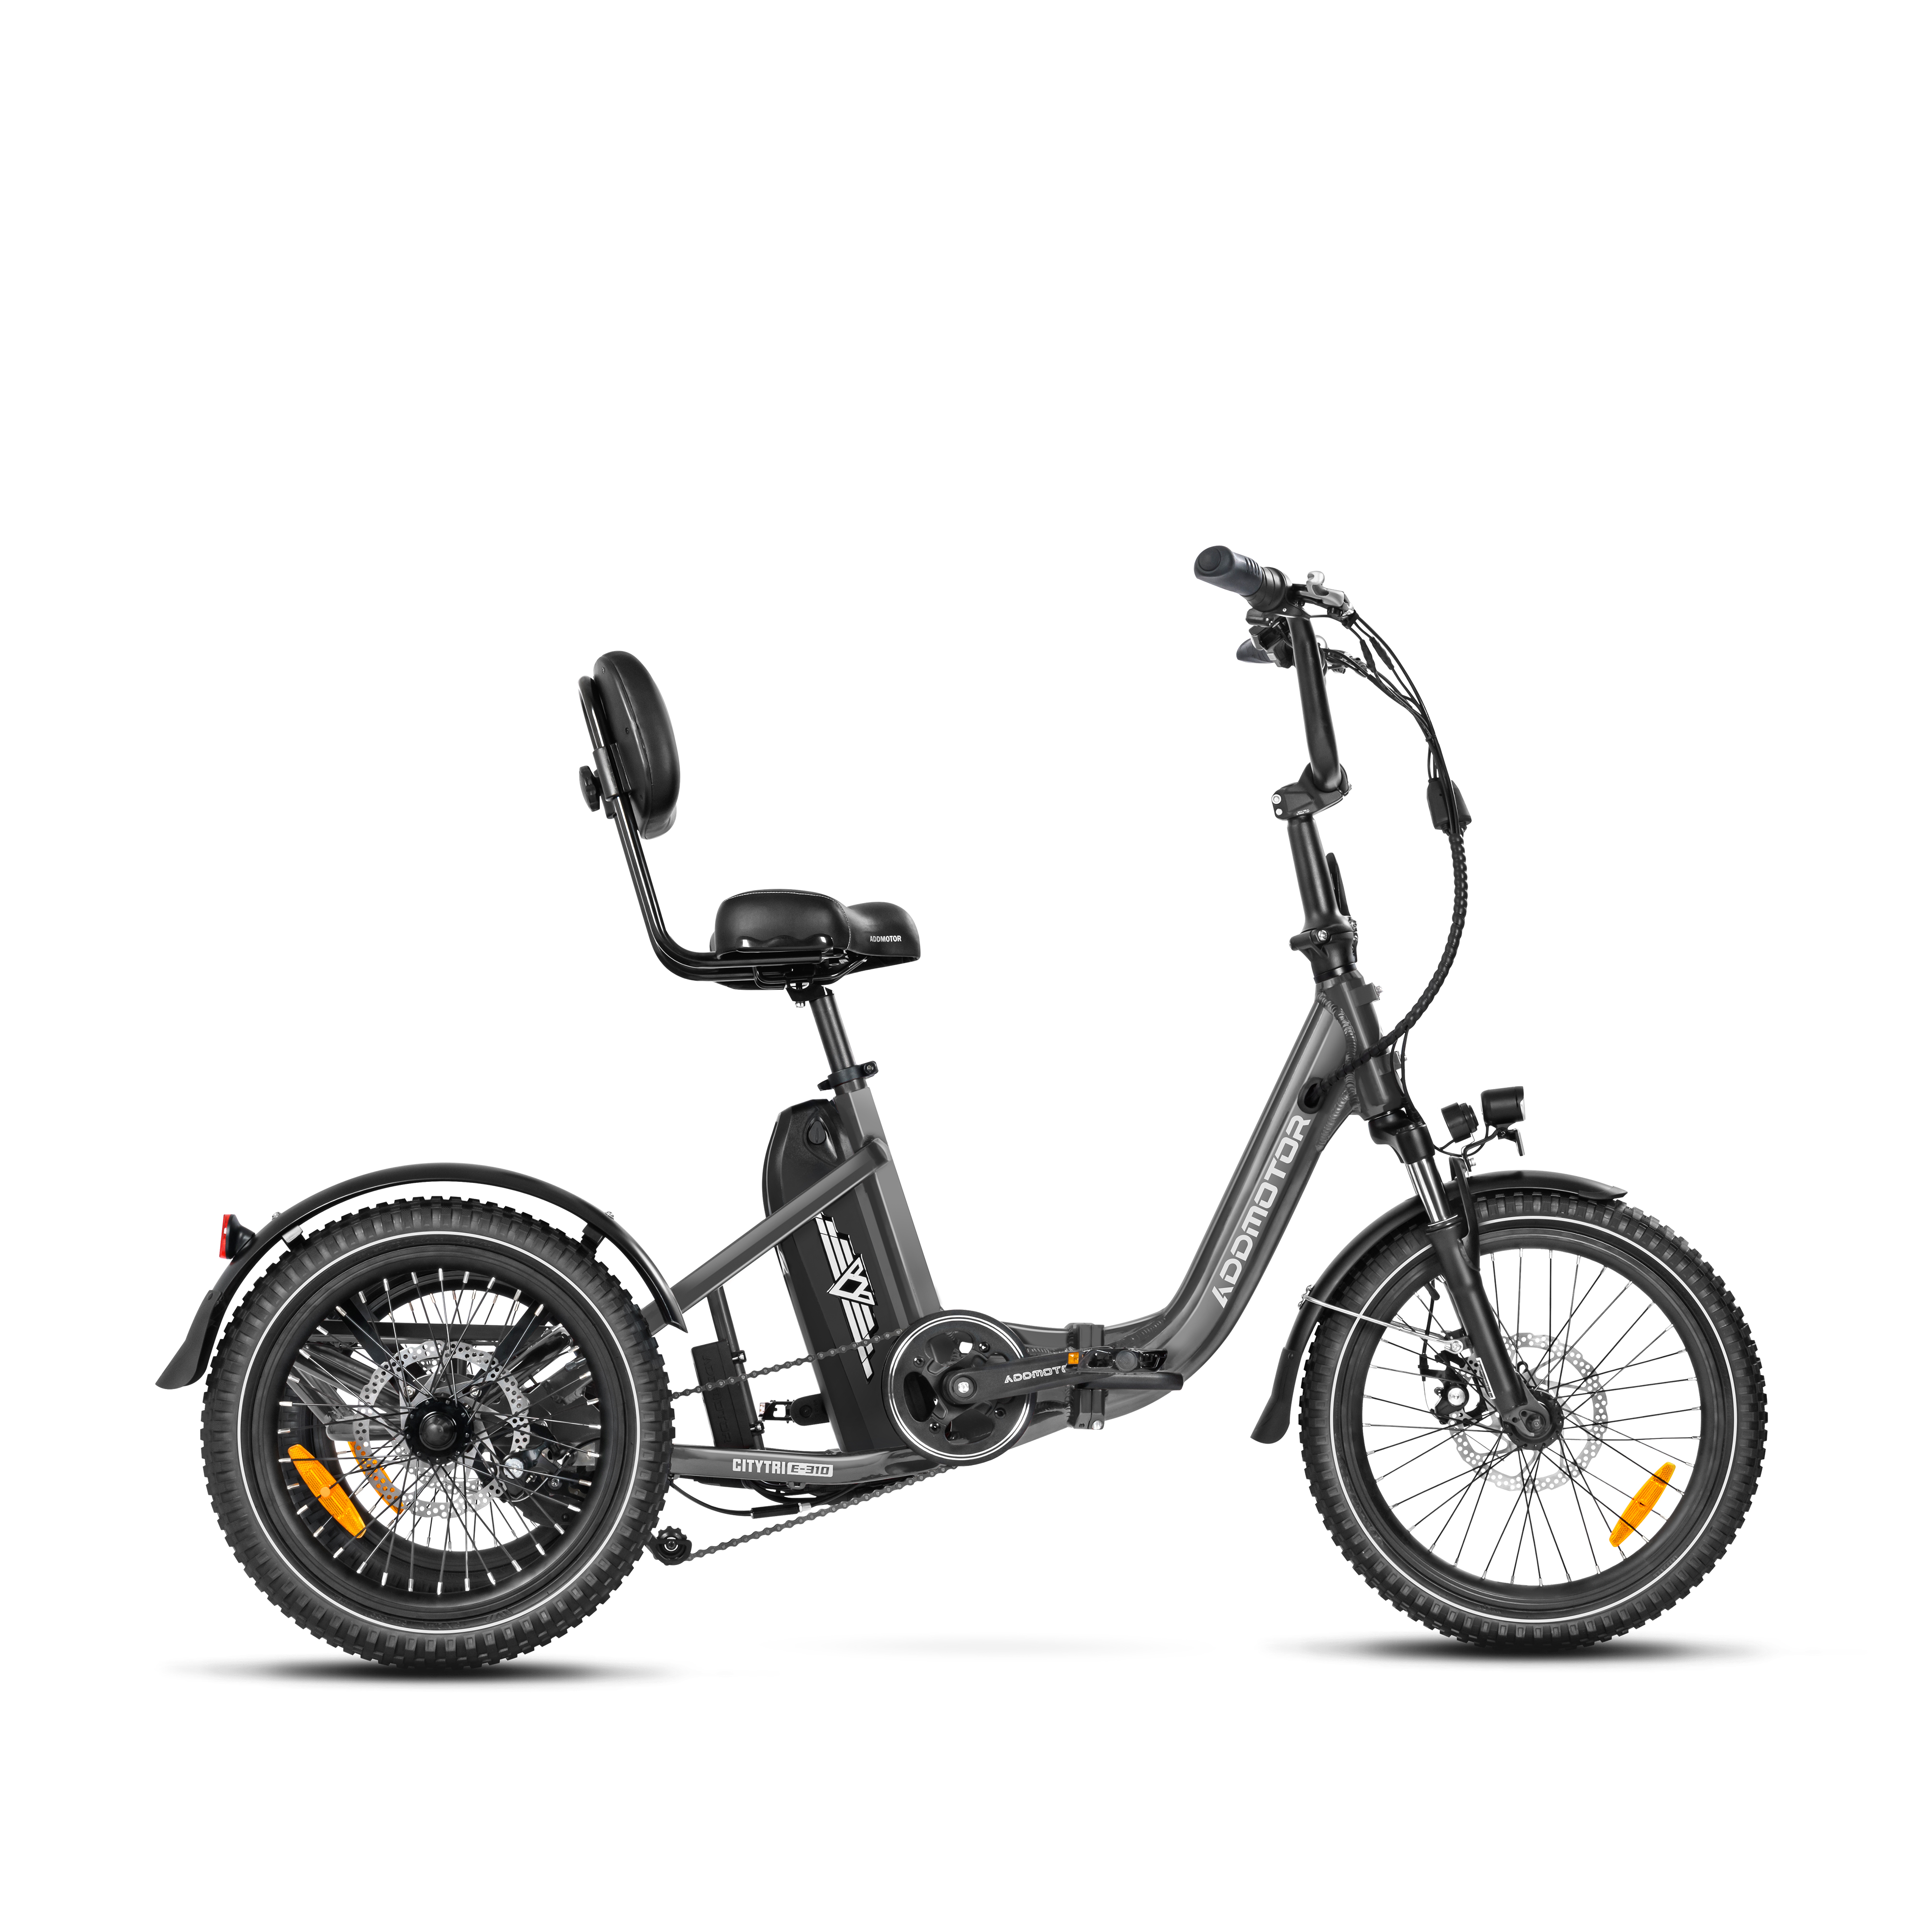 Addmotor Citytri E-310 750W 20Ah Electric Trike for Adults Best Electric Tricycle Under $2000, Up To 90 Miles - Grey